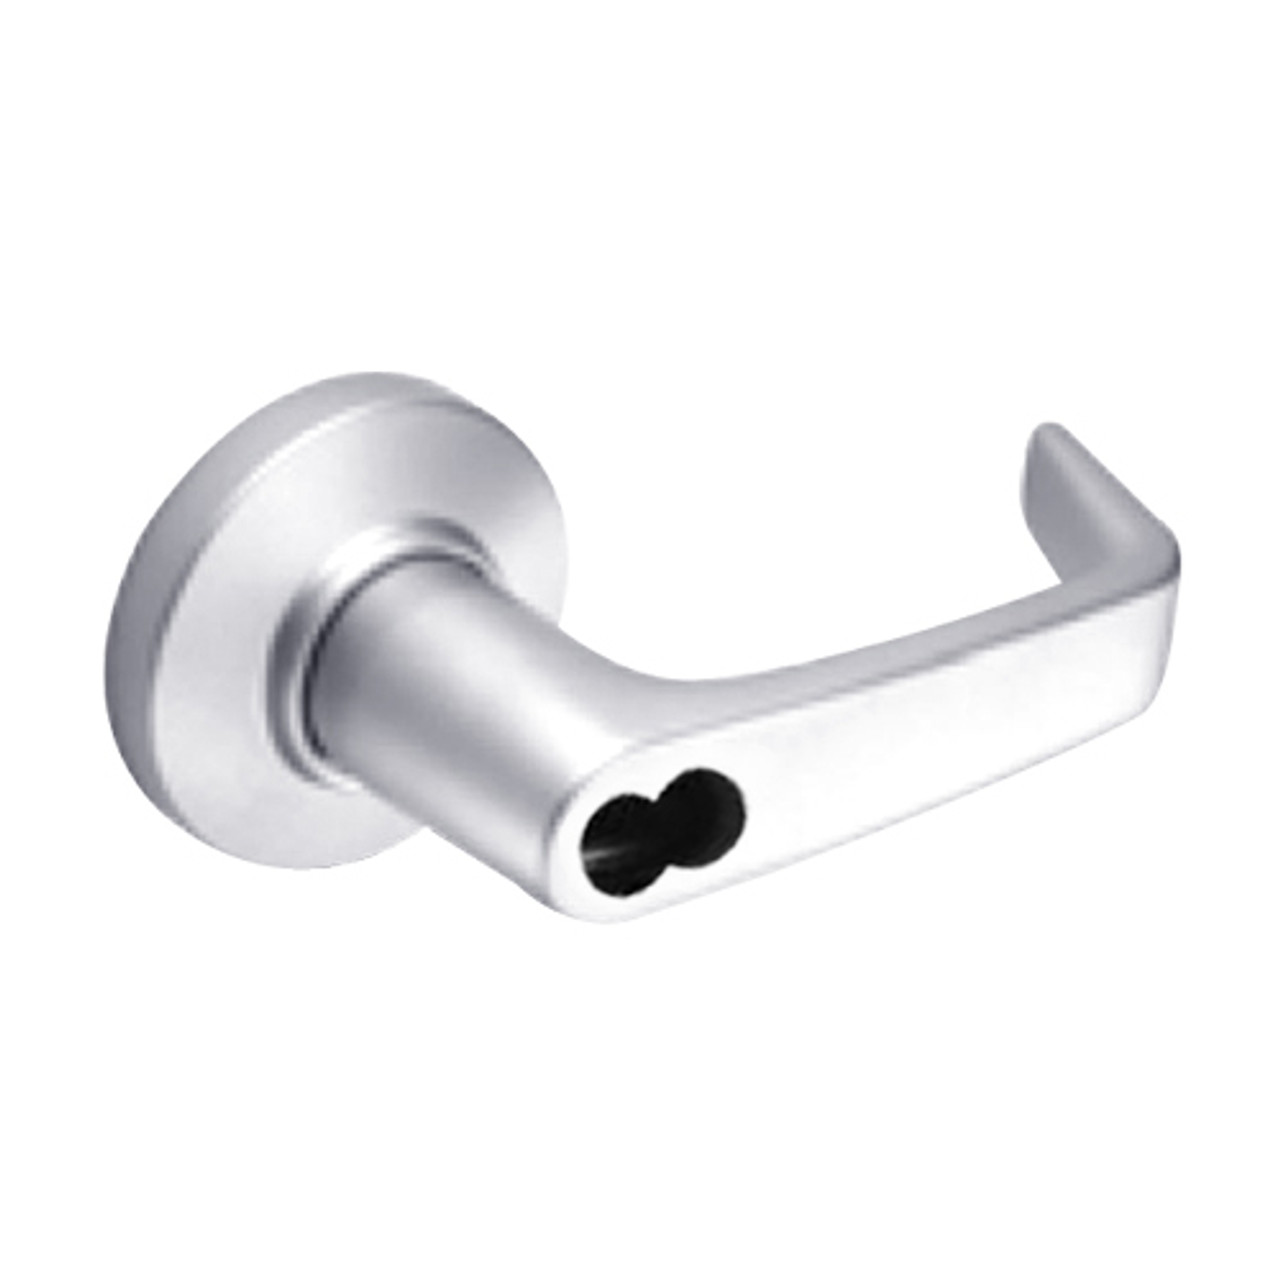 9K37AB15CS3625 Best 9K Series Entrance Cylindrical Lever Locks with Contour Angle with Return Lever Design Accept 7 Pin Best Core in Bright Chrome